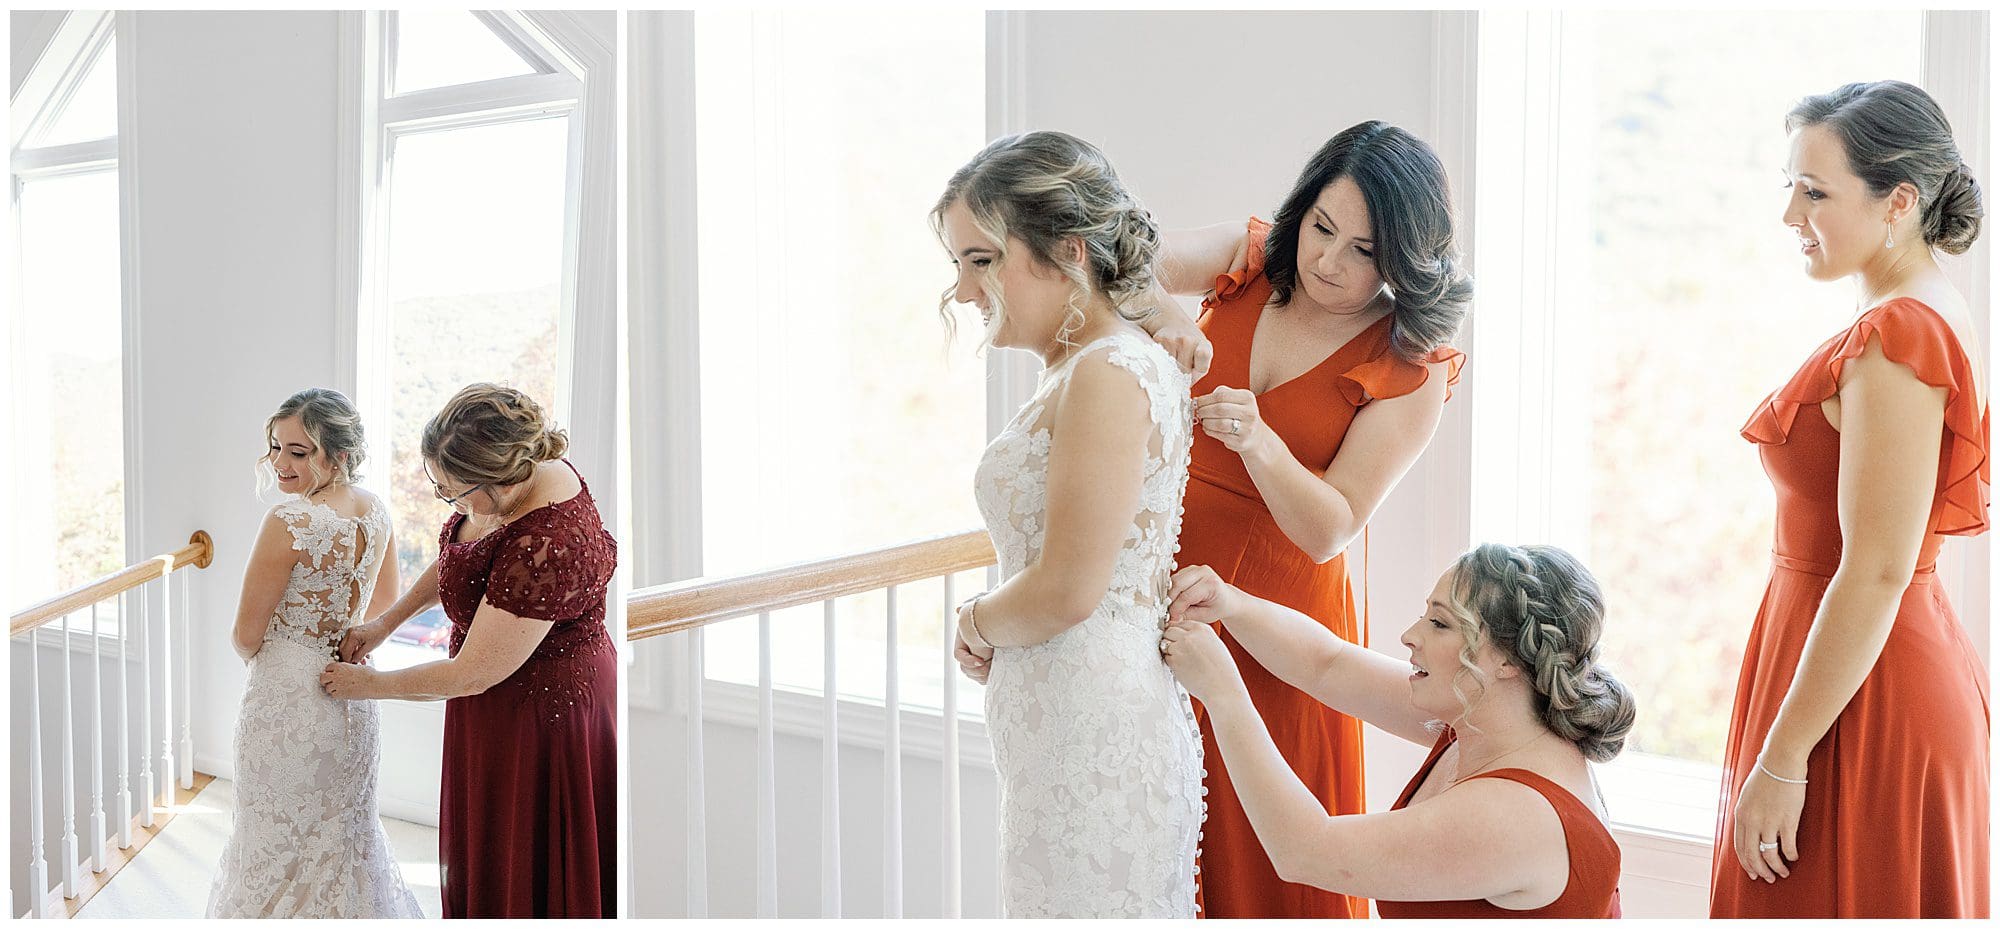 Bride being assisted by three women in adjusting her wedding gown near a staircase, all wearing formal dresses in a bright room with large windows.